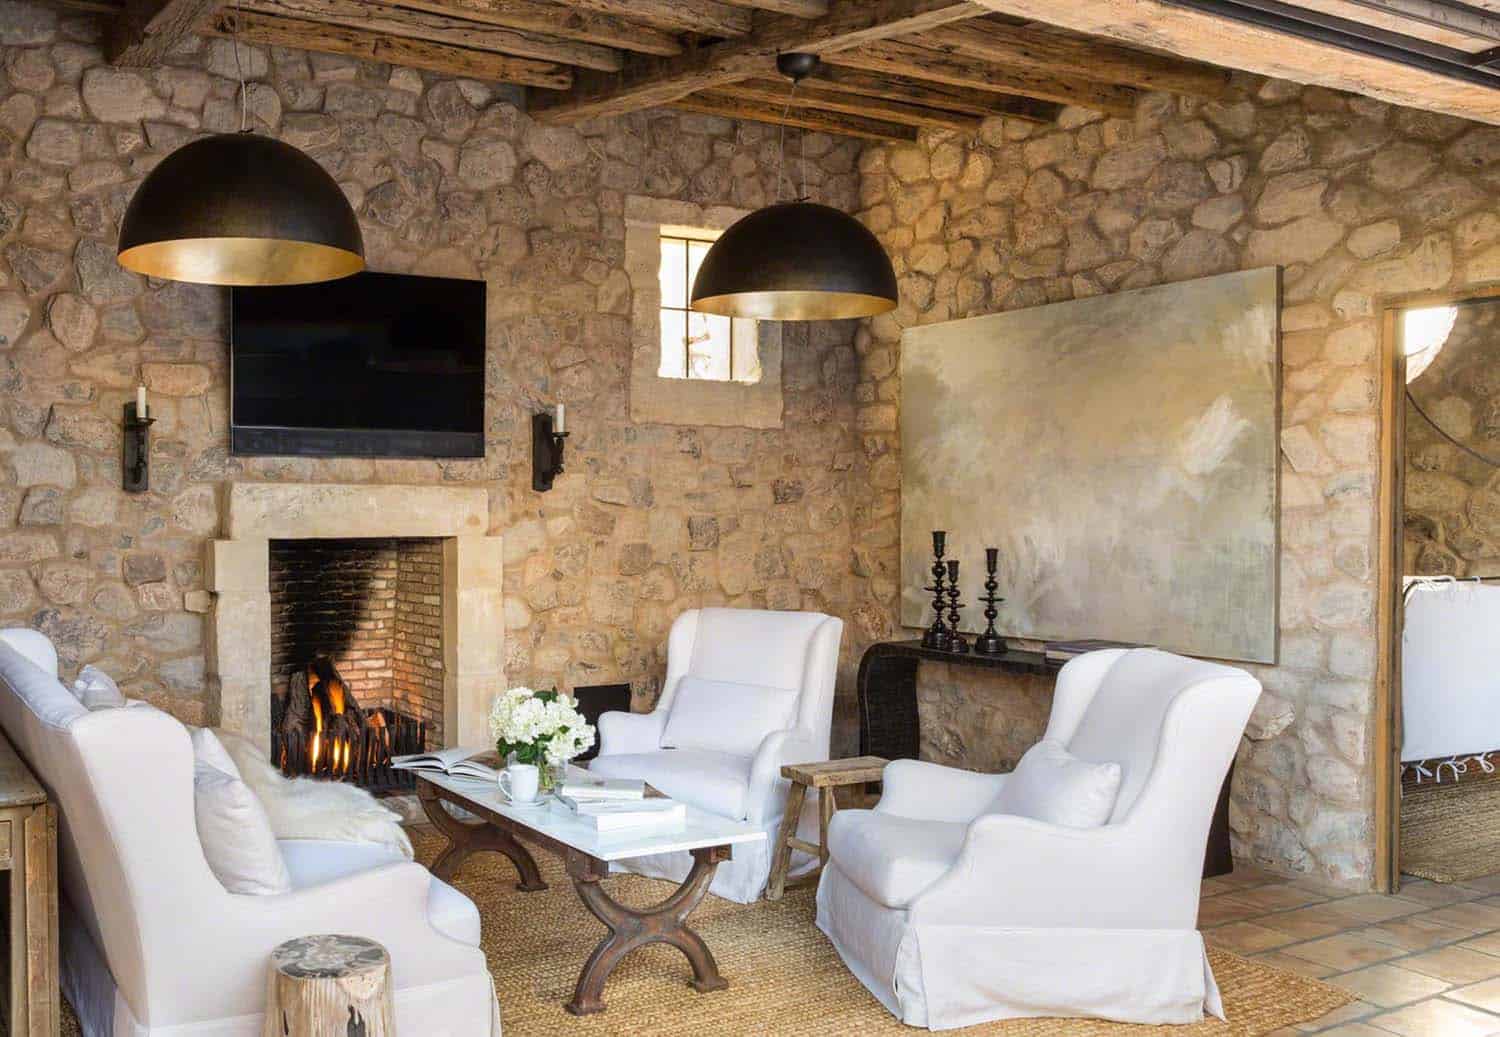 Rustic Mediterranean Style Dream Home-OZ Architects-15-1 Kindesign